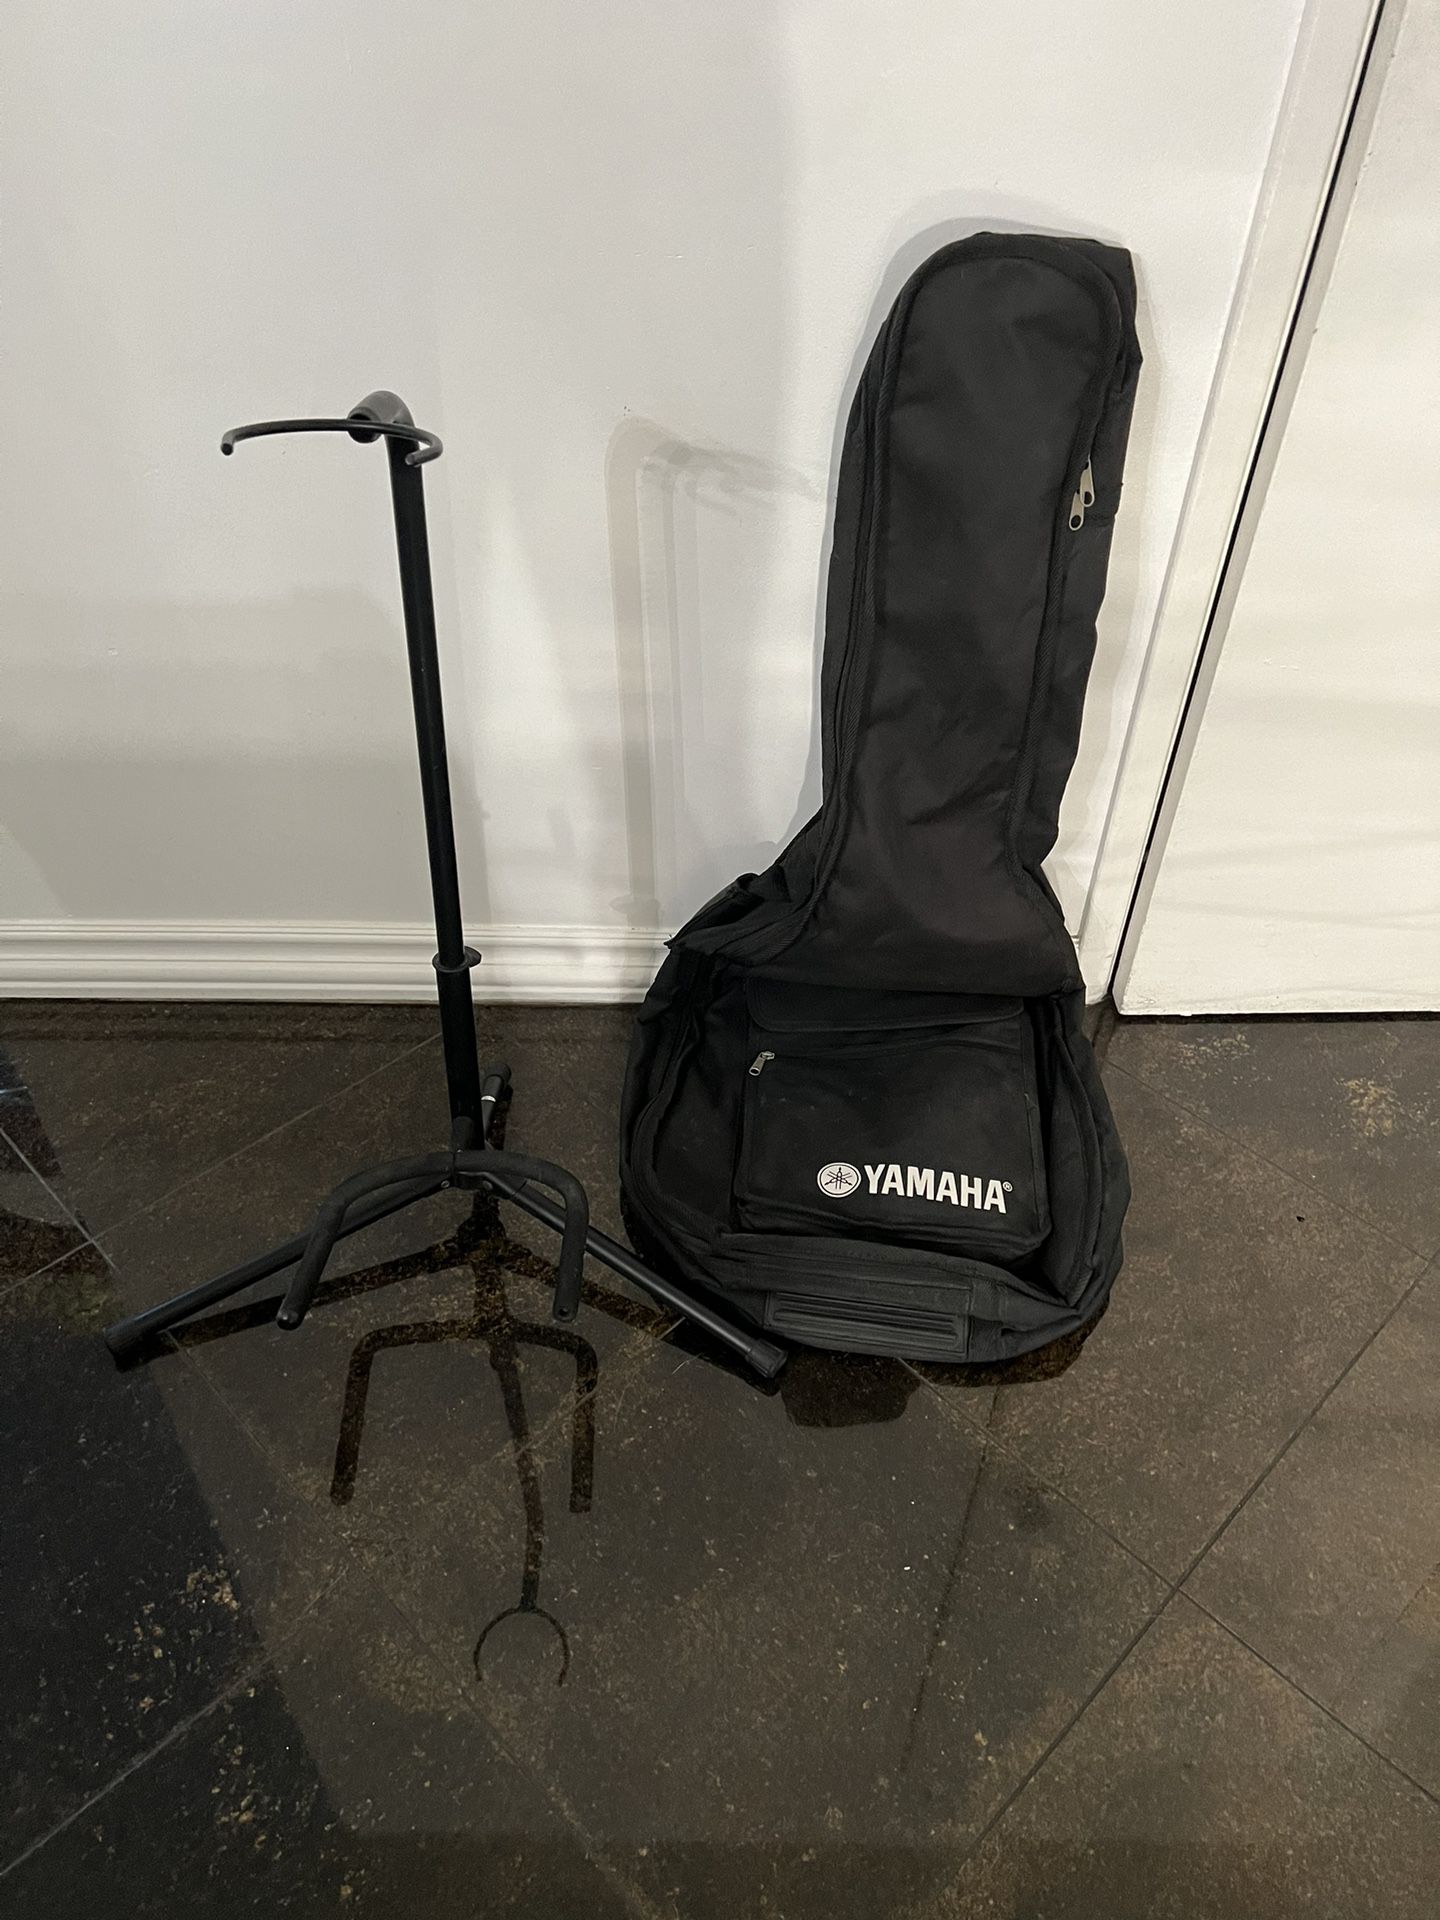 Guitar Case/Backpack And Stand